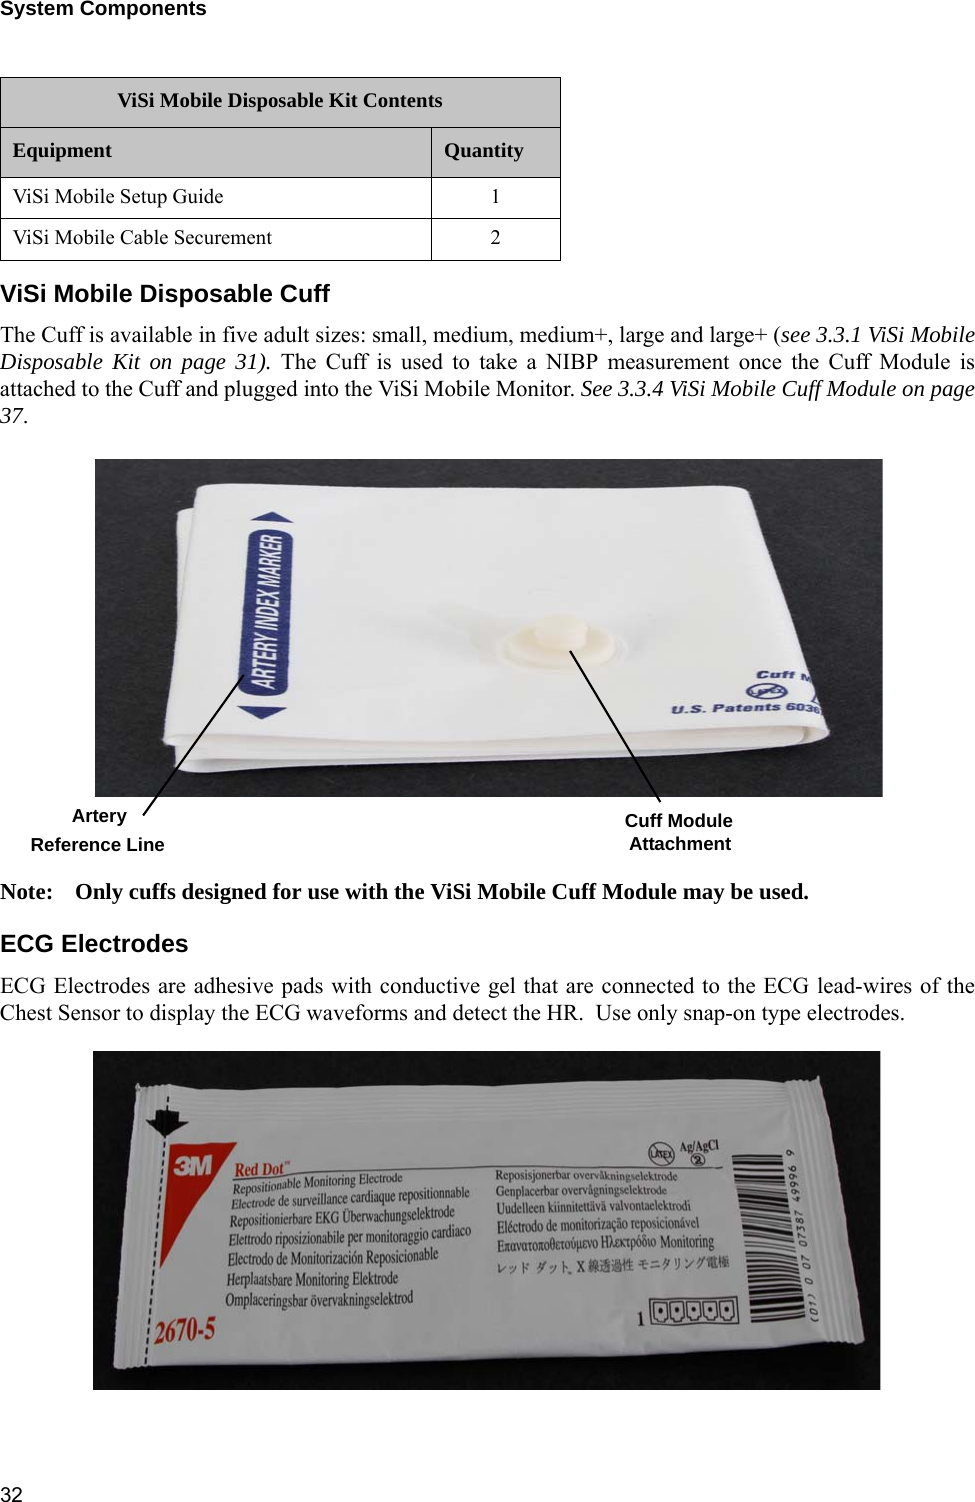 System Components 32ViSi Mobile Disposable CuffThe Cuff is available in five adult sizes: small, medium, medium+, large and large+ (see 3.3.1 ViSi MobileDisposable Kit on page 31). The Cuff is used to take a NIBP measurement once the Cuff Module isattached to the Cuff and plugged into the ViSi Mobile Monitor. See 3.3.4 ViSi Mobile Cuff Module on page37.Note: Only cuffs designed for use with the ViSi Mobile Cuff Module may be used.ECG ElectrodesECG Electrodes are adhesive pads with conductive gel that are connected to the ECG lead-wires of theChest Sensor to display the ECG waveforms and detect the HR.  Use only snap-on type electrodes.ViSi Mobile Setup Guide 1ViSi Mobile Cable Securement 2ViSi Mobile Disposable Kit ContentsEquipment QuantityArteryReference Line Cuff ModuleAttachment